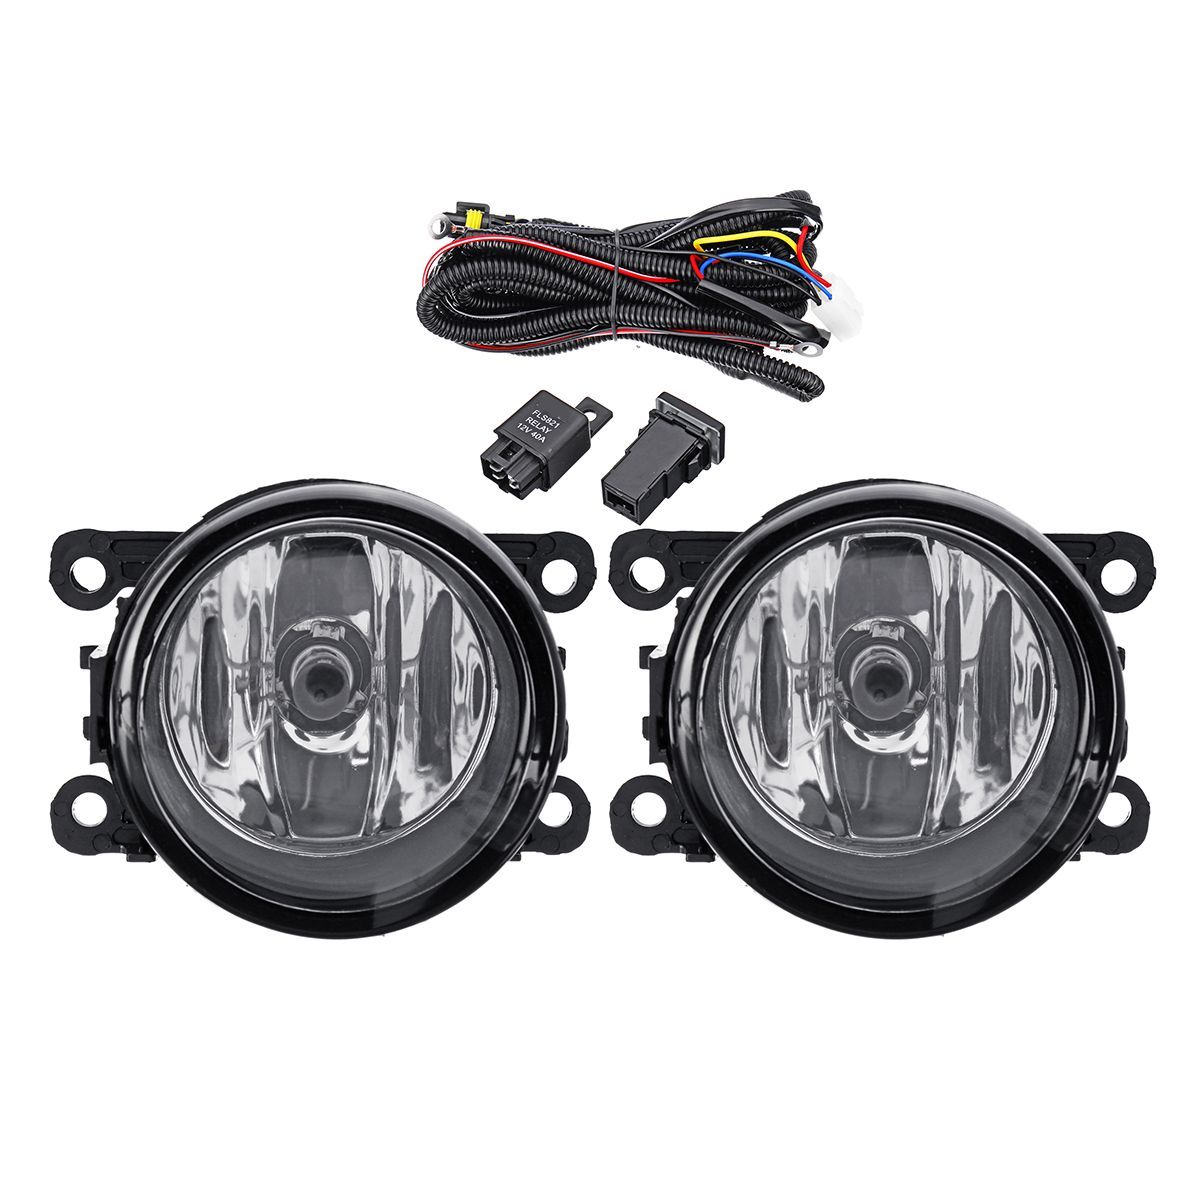 Car-Front-Bumper-Fog-Lights-with-H11-Lamps-Harness-Pair-for-Mitsubishi-Outlander-SportRVRASX-1455984